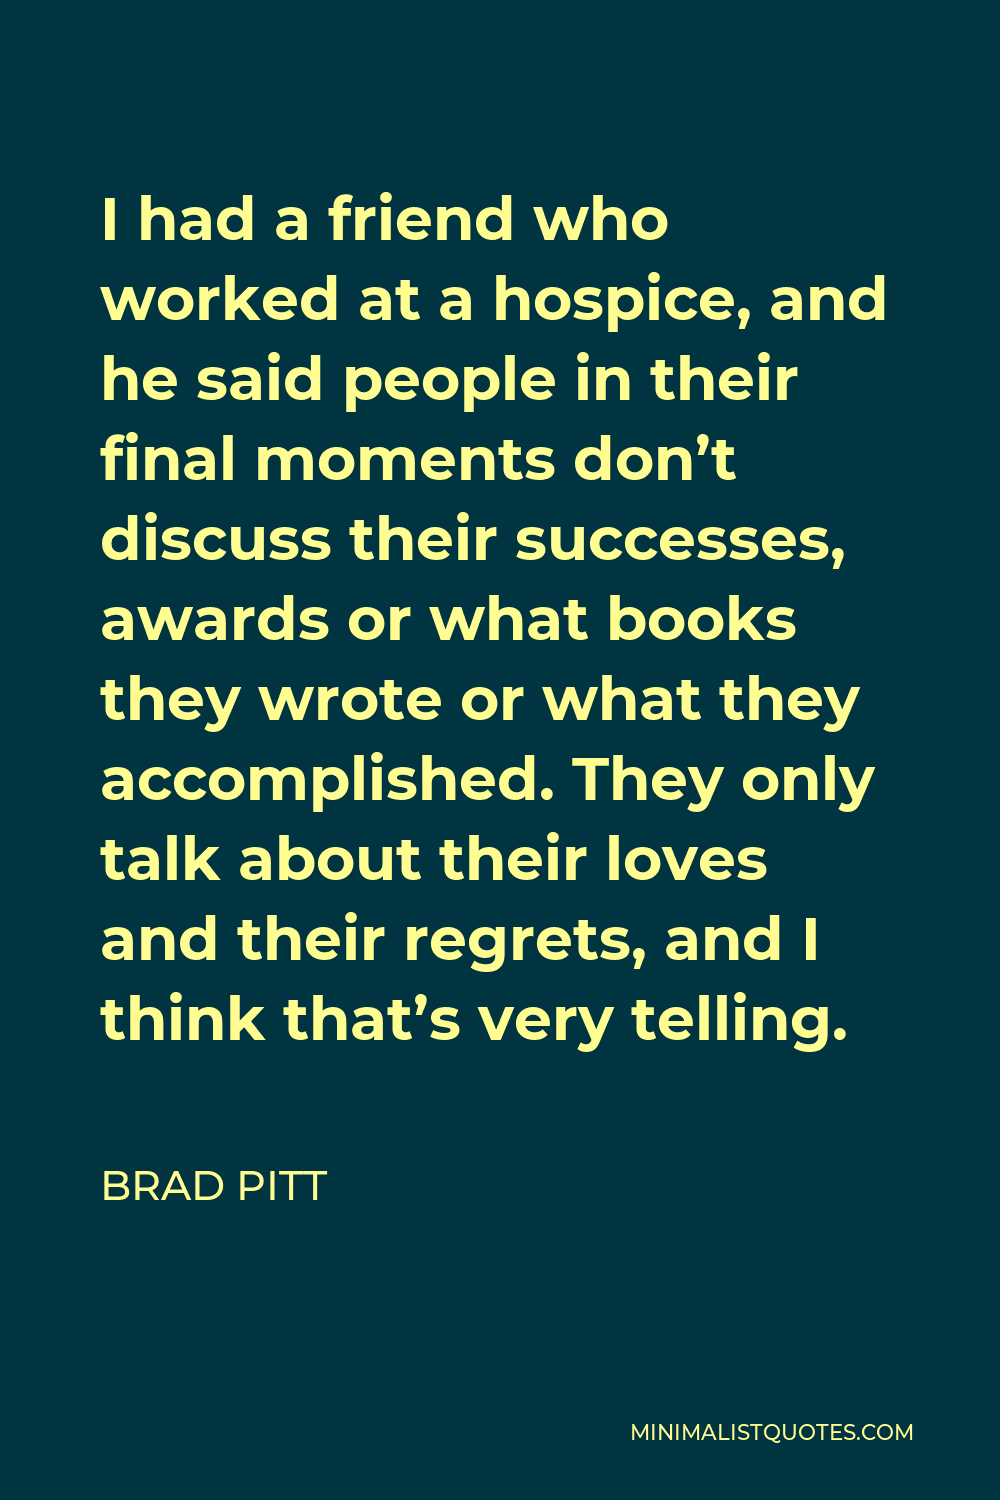 Brad Pitt Quote - I had a friend who worked at a hospice, and he said people in their final moments don’t discuss their successes, awards or what books they wrote or what they accomplished. They only talk about their loves and their regrets, and I think that’s very telling.